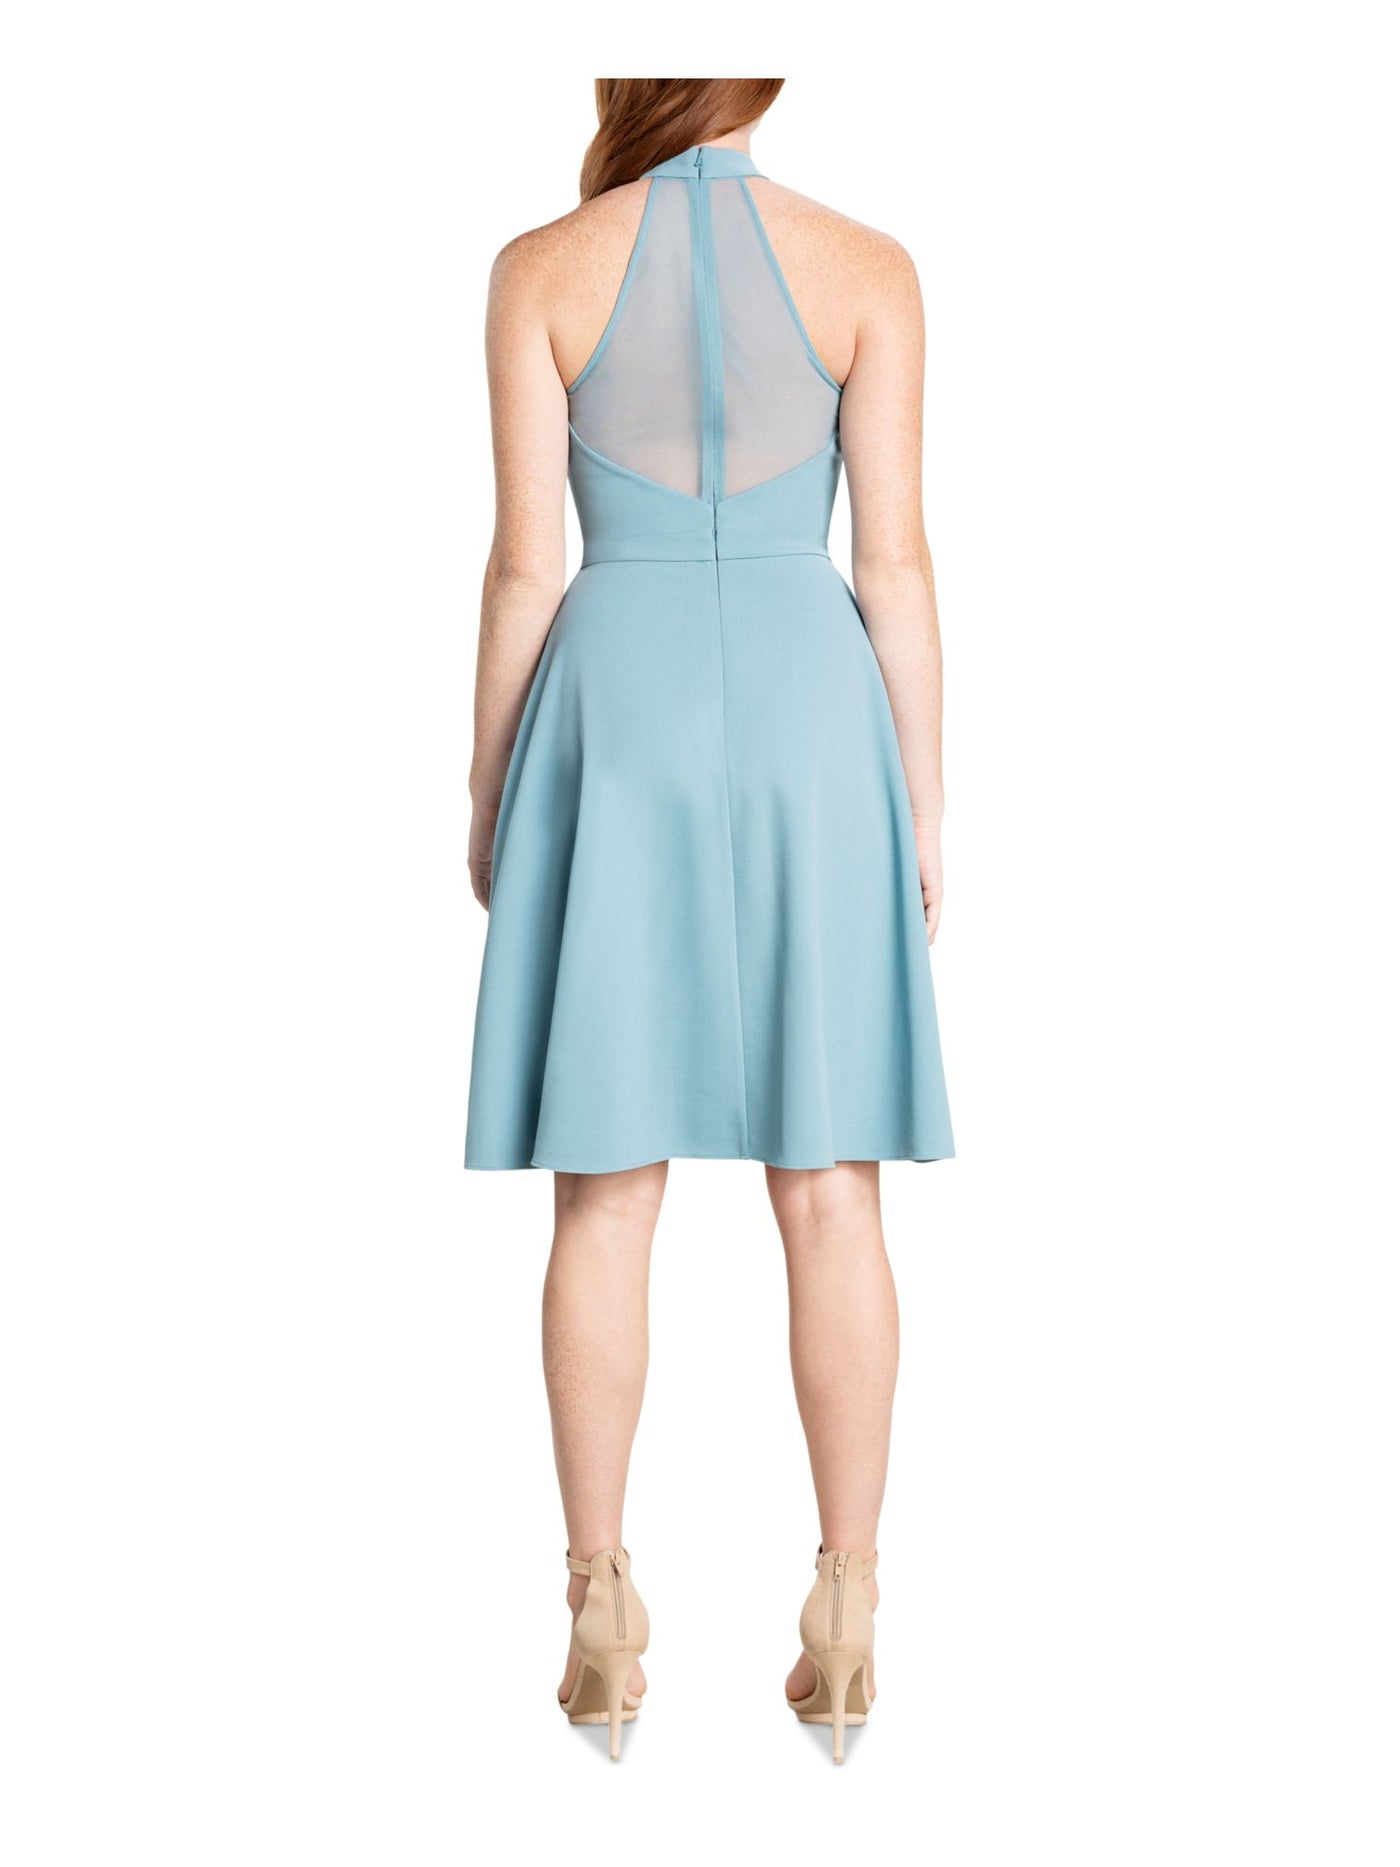 DRESS THE POPULATION Womens Teal Zippered Pocketed Mesh Inset Top Back Lined Sleeveless Halter Above The Knee Party Fit + Flare Dress S